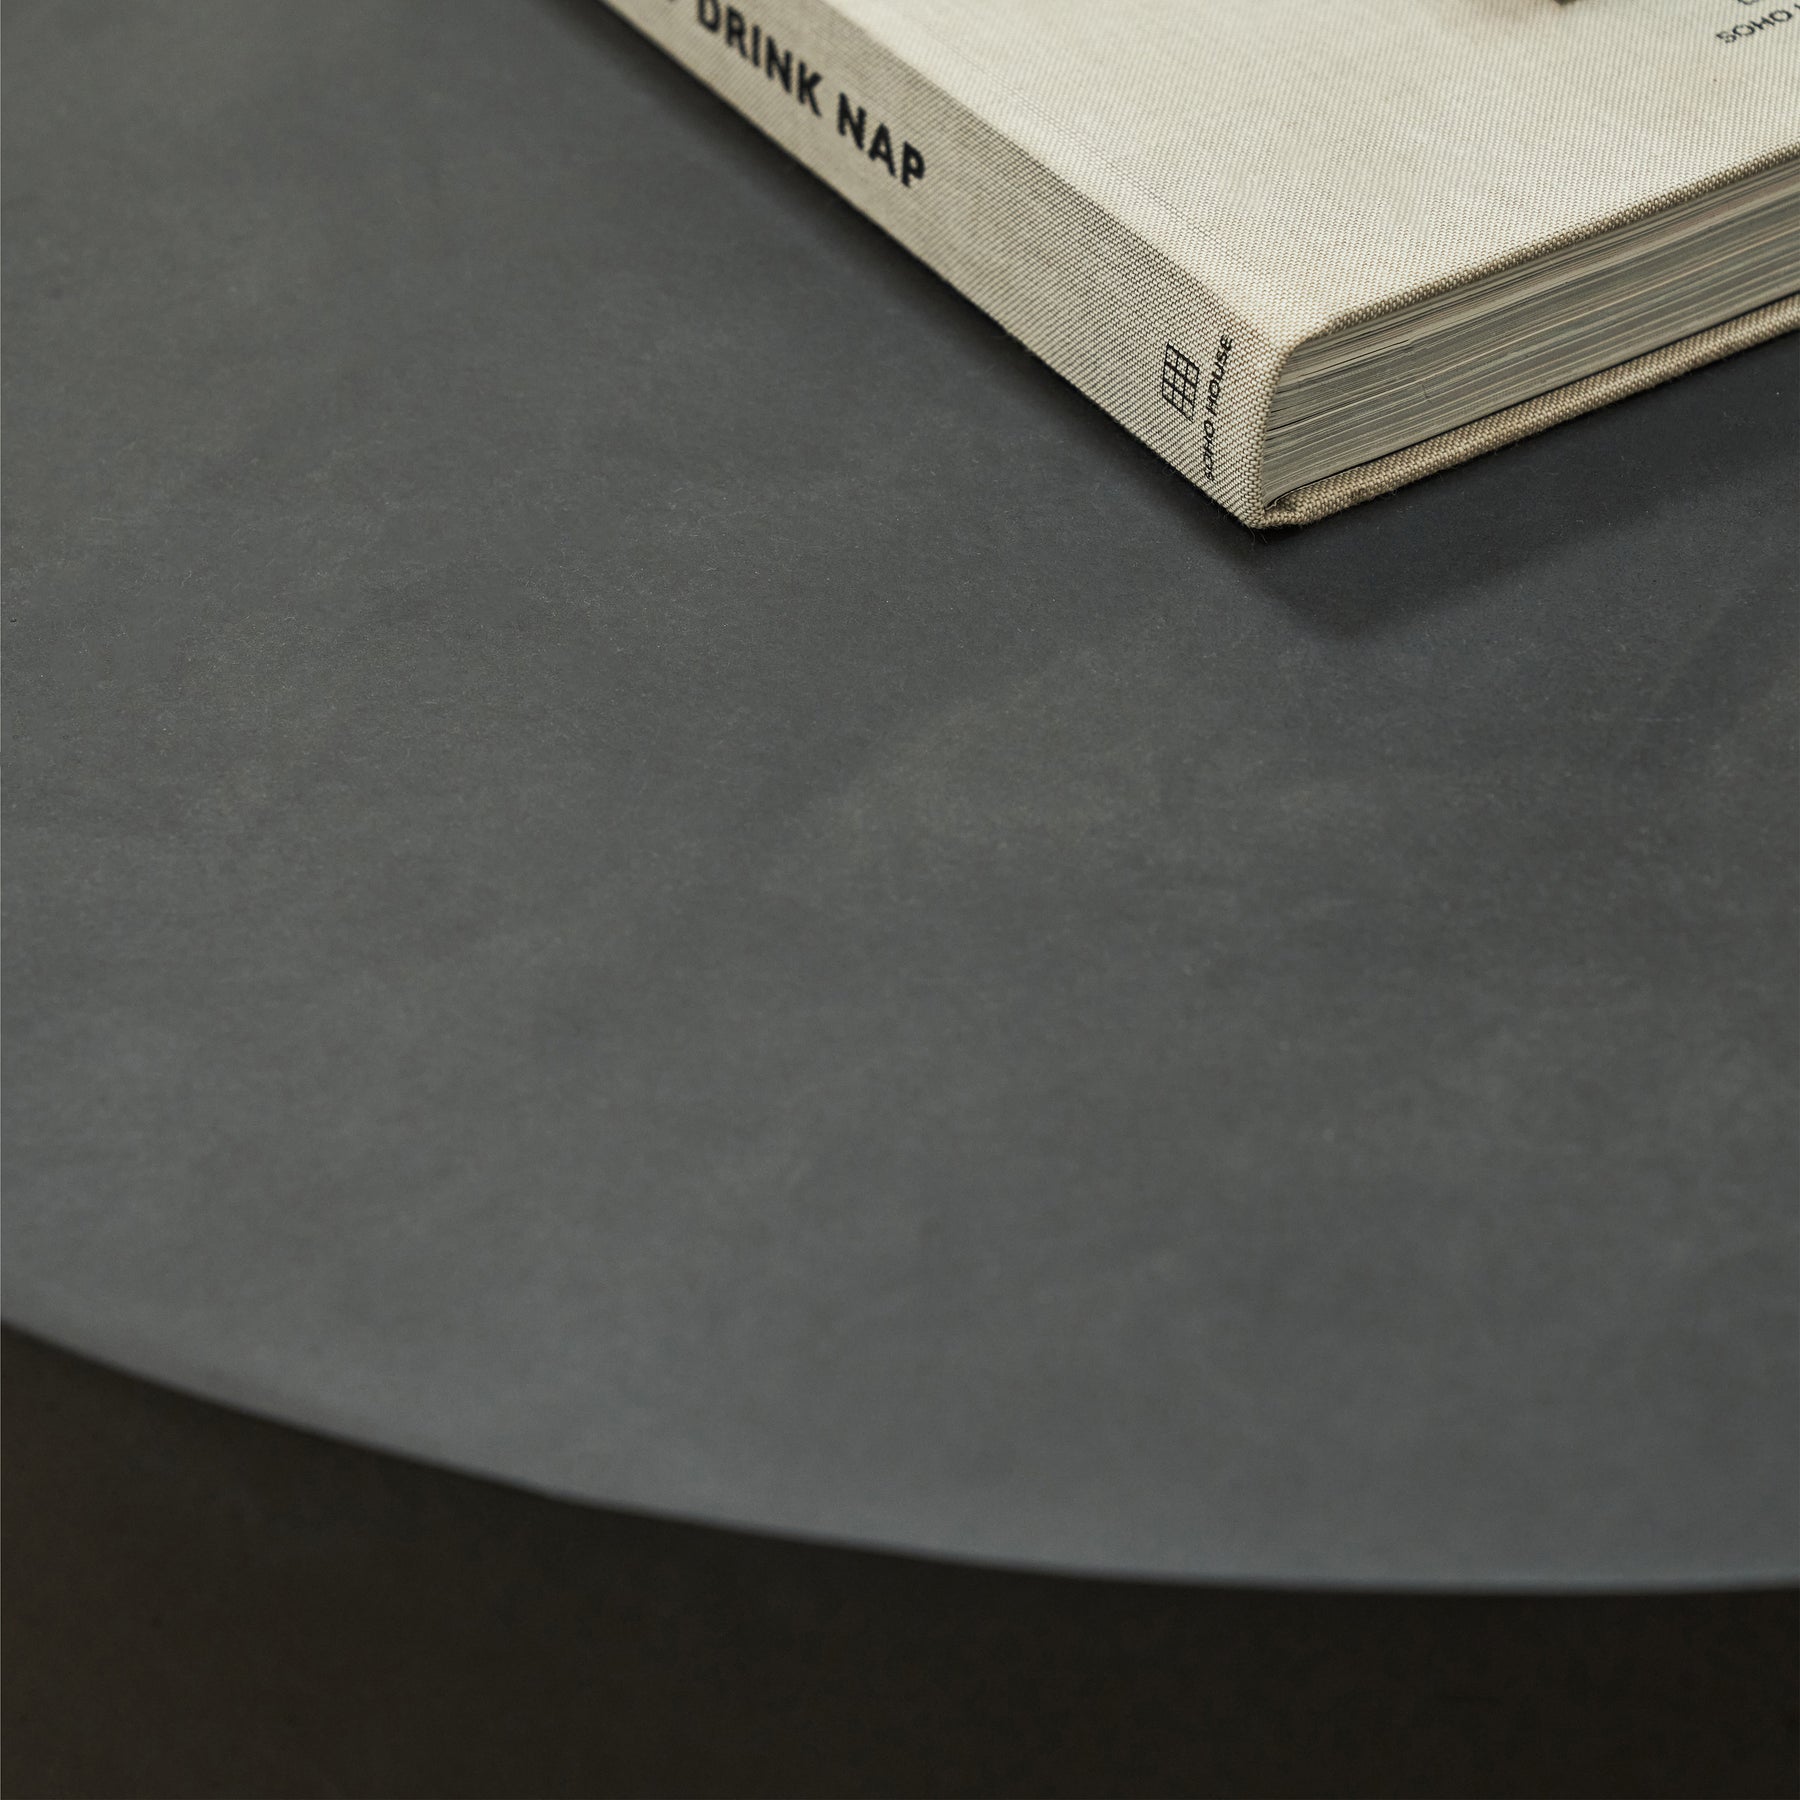 Minimal Onyx Shaped Coffee Table Large detail shot of book on table